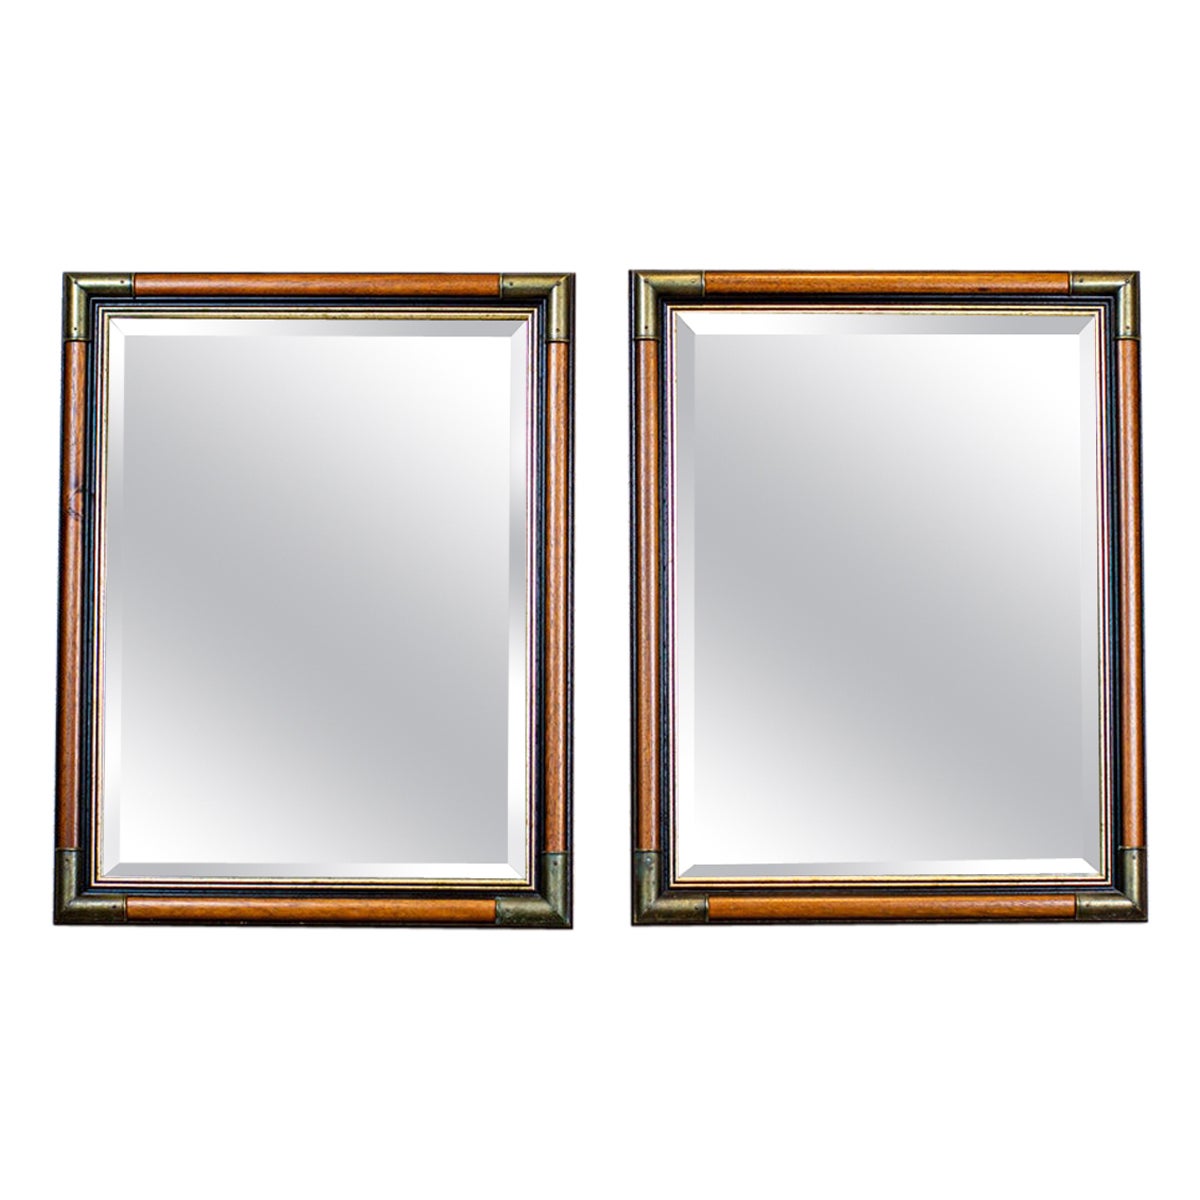 Pair of Modern Mirrors in Stylized Frame